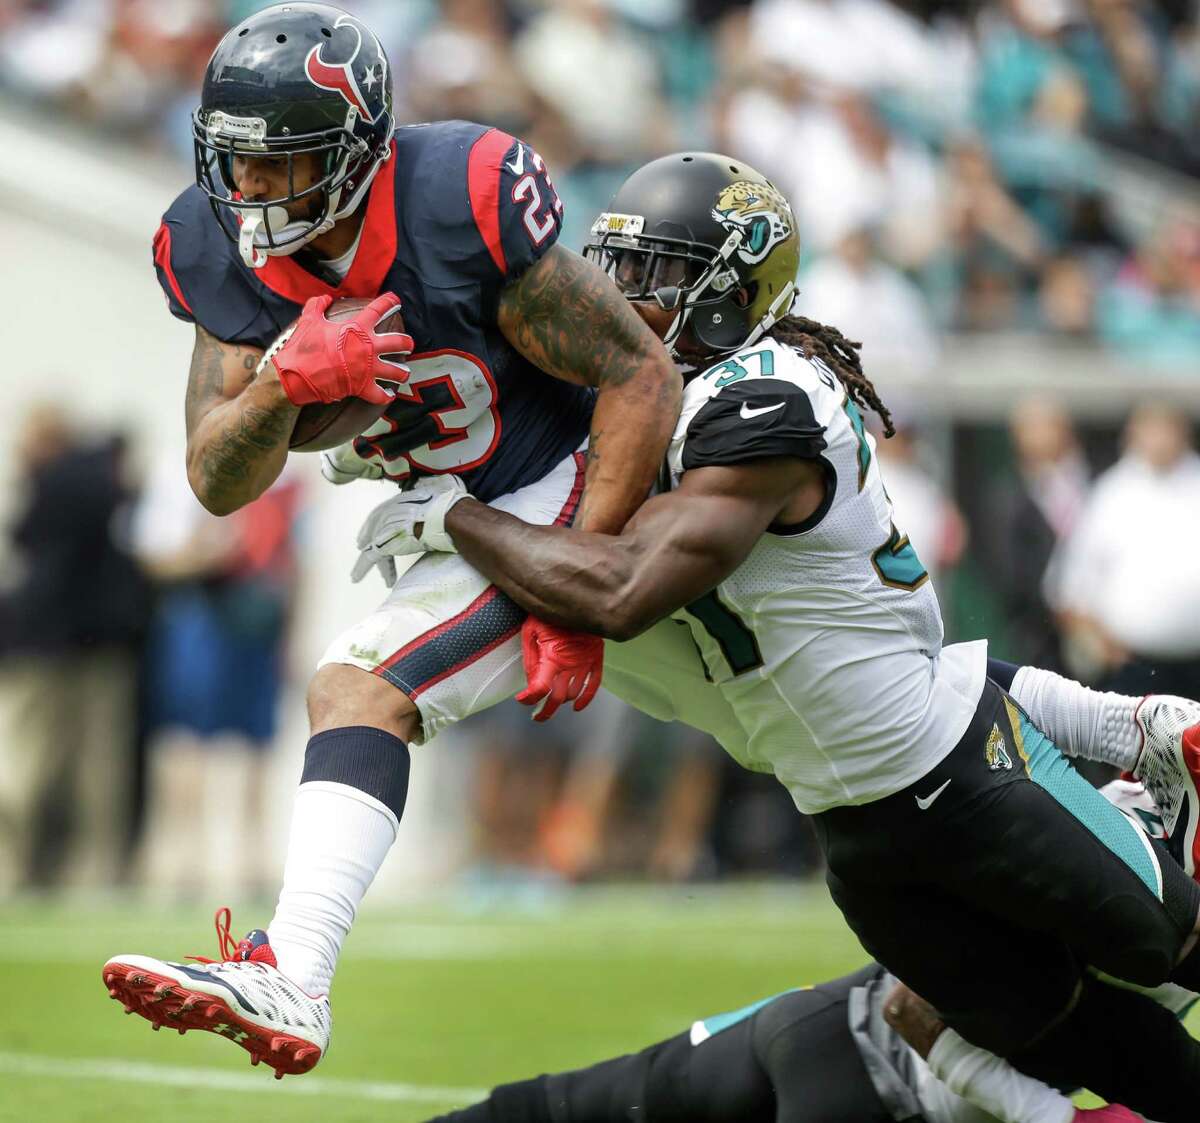 Texans running back Arian Foster reaches the end zone in the first quarter despite a hit by Jaguars safety Johnathan Cyprien.